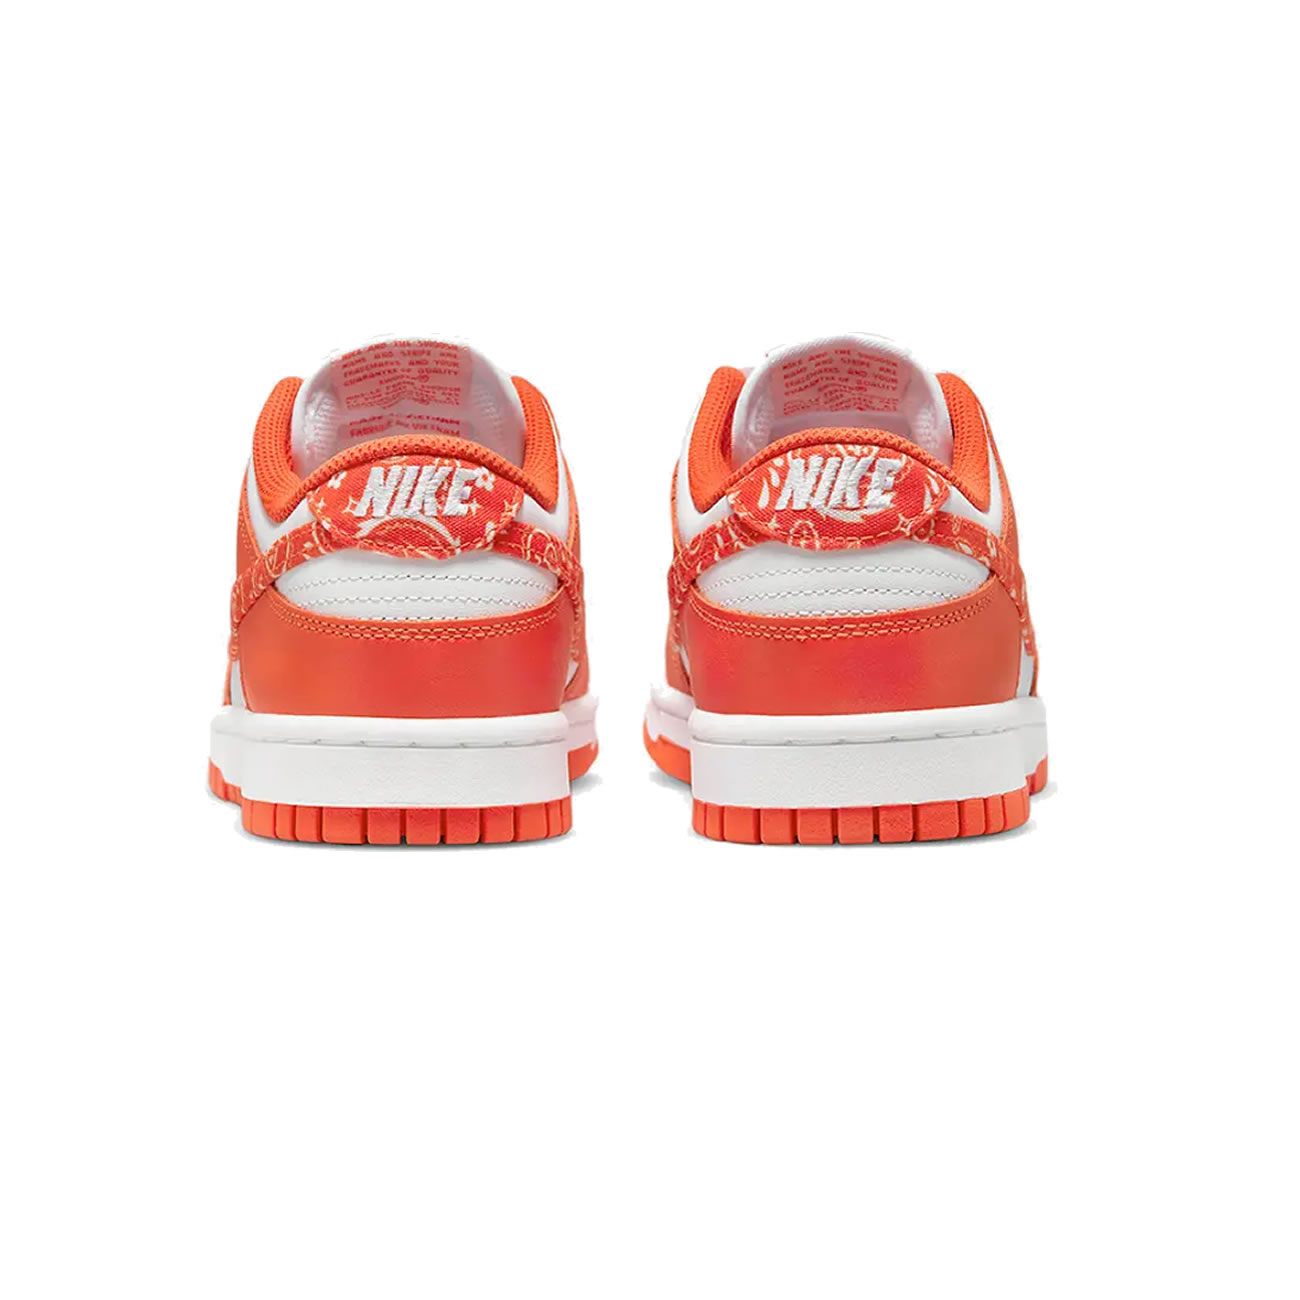 Nike Dunk Low Essential Paisley Pack Orange W Dh4401 103 (9) - newkick.org